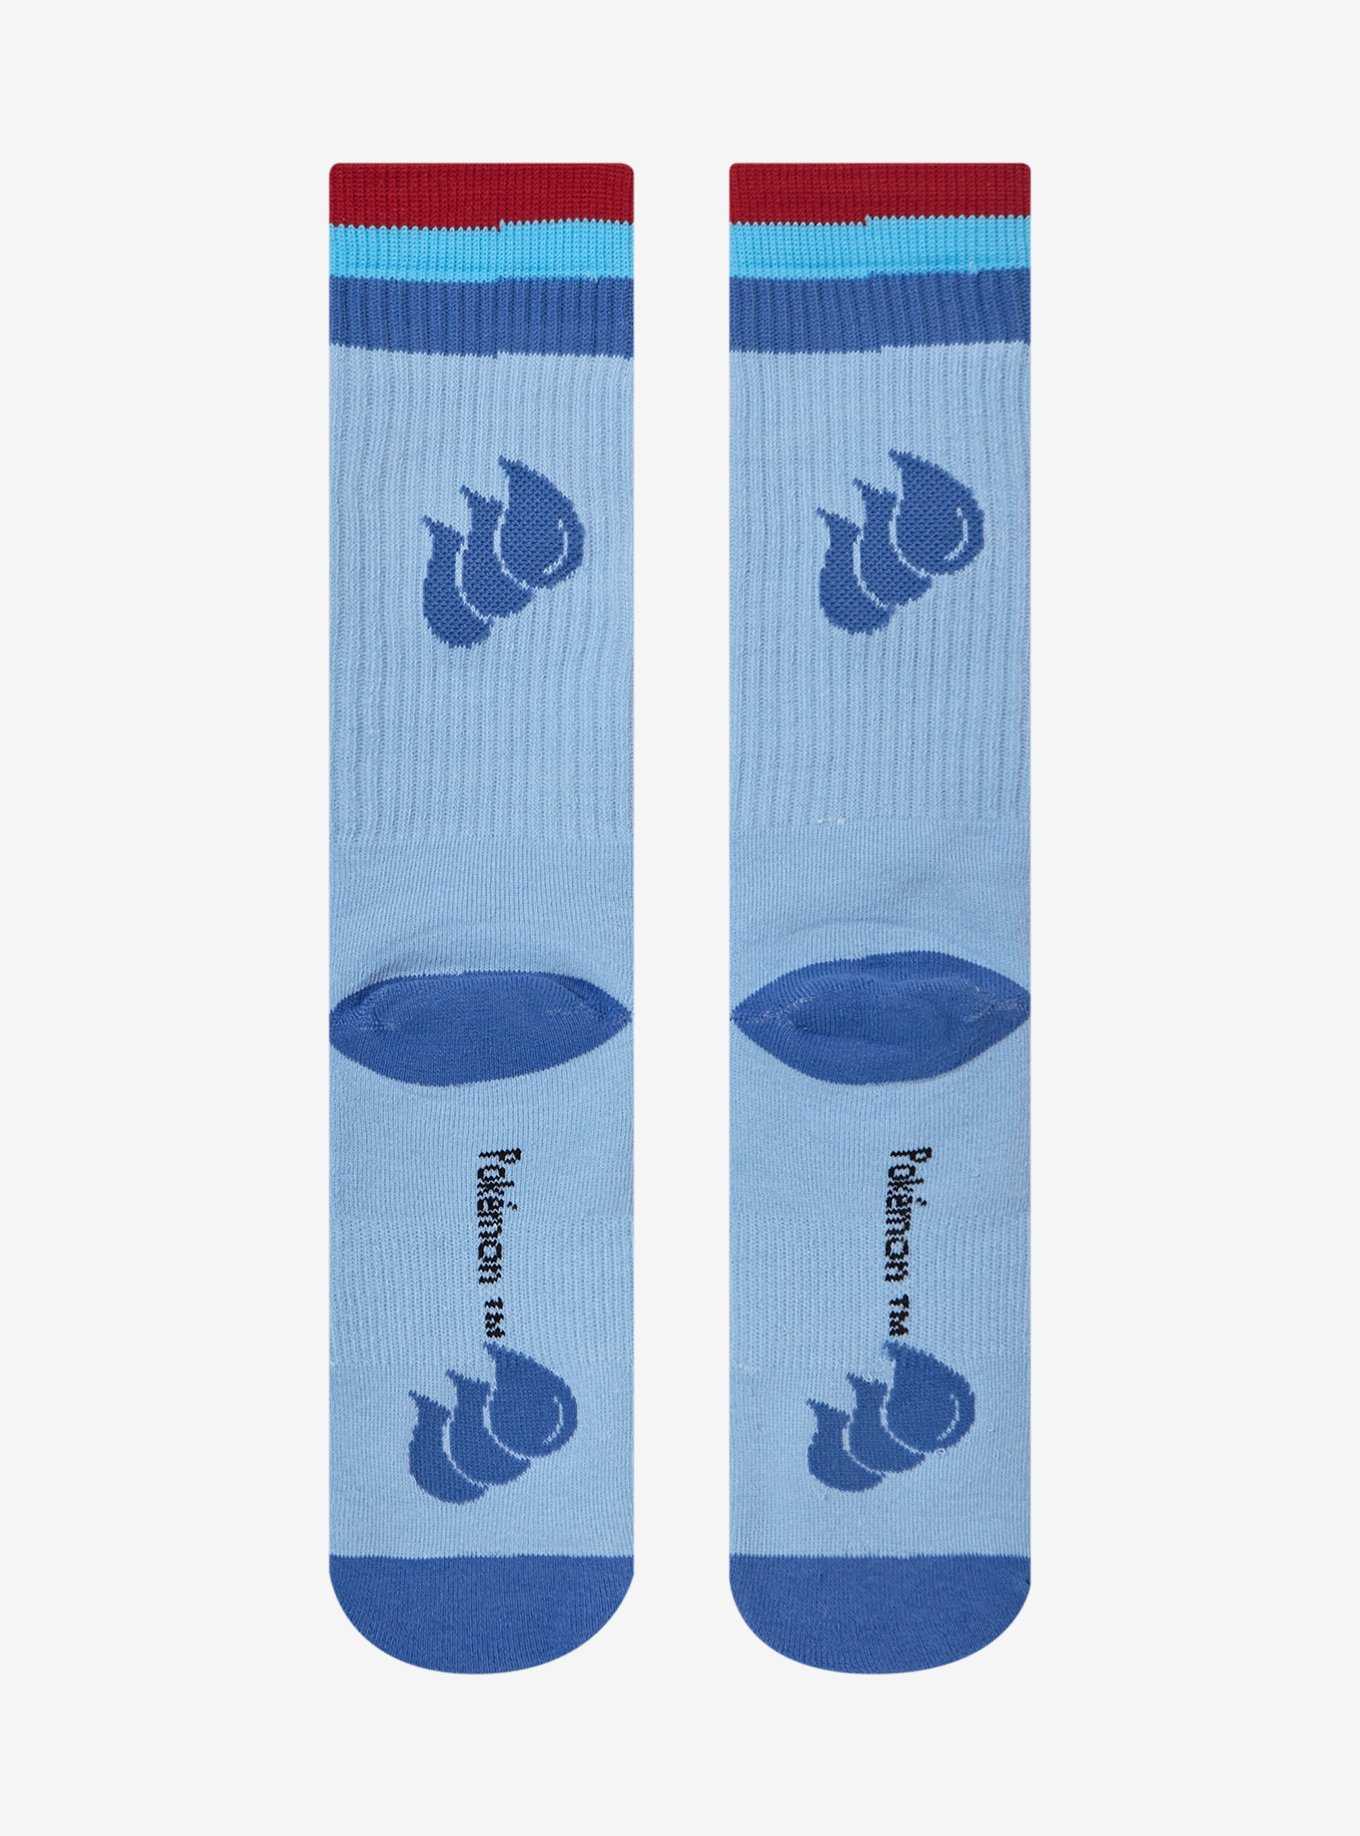 Pokémon Squirtle Faces Crew Socks - BoxLunch Exclusive, , hi-res